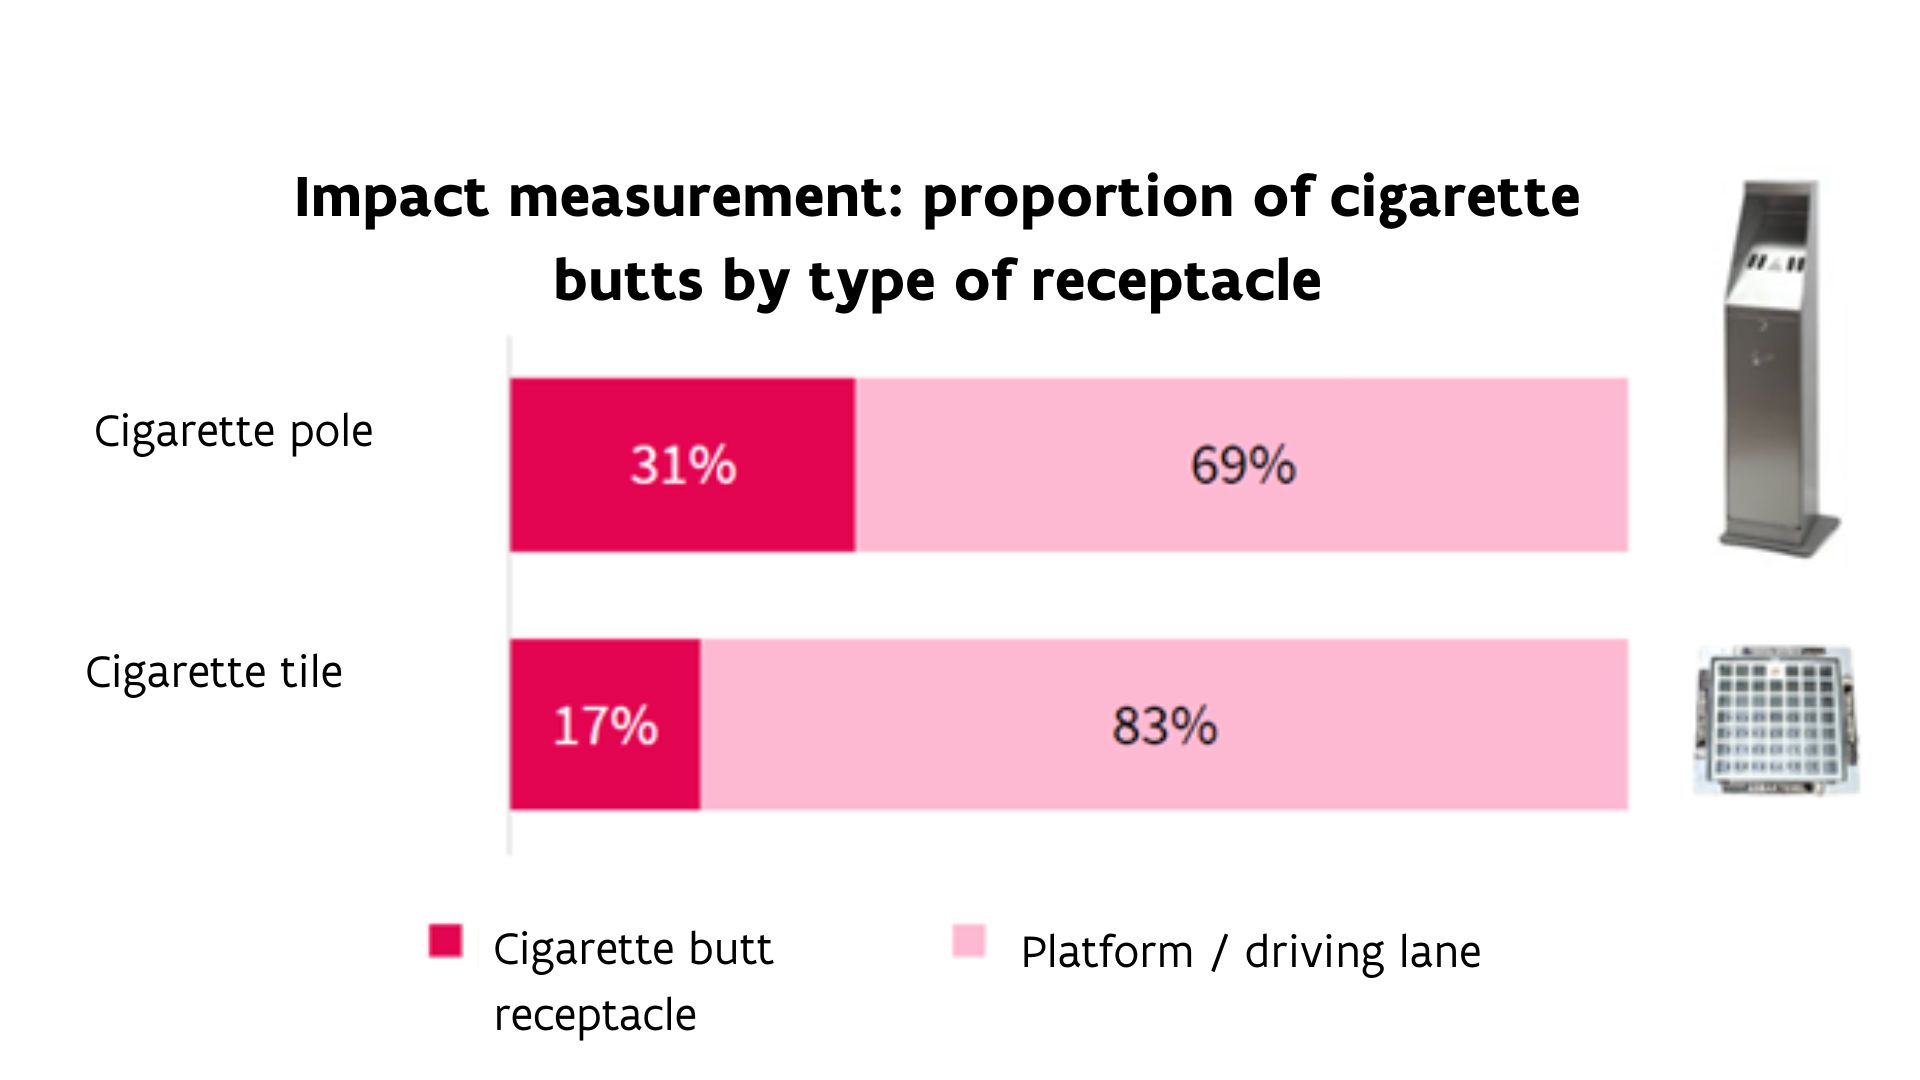 Impact measurement: proportion of cigarette butts by type of receptacle